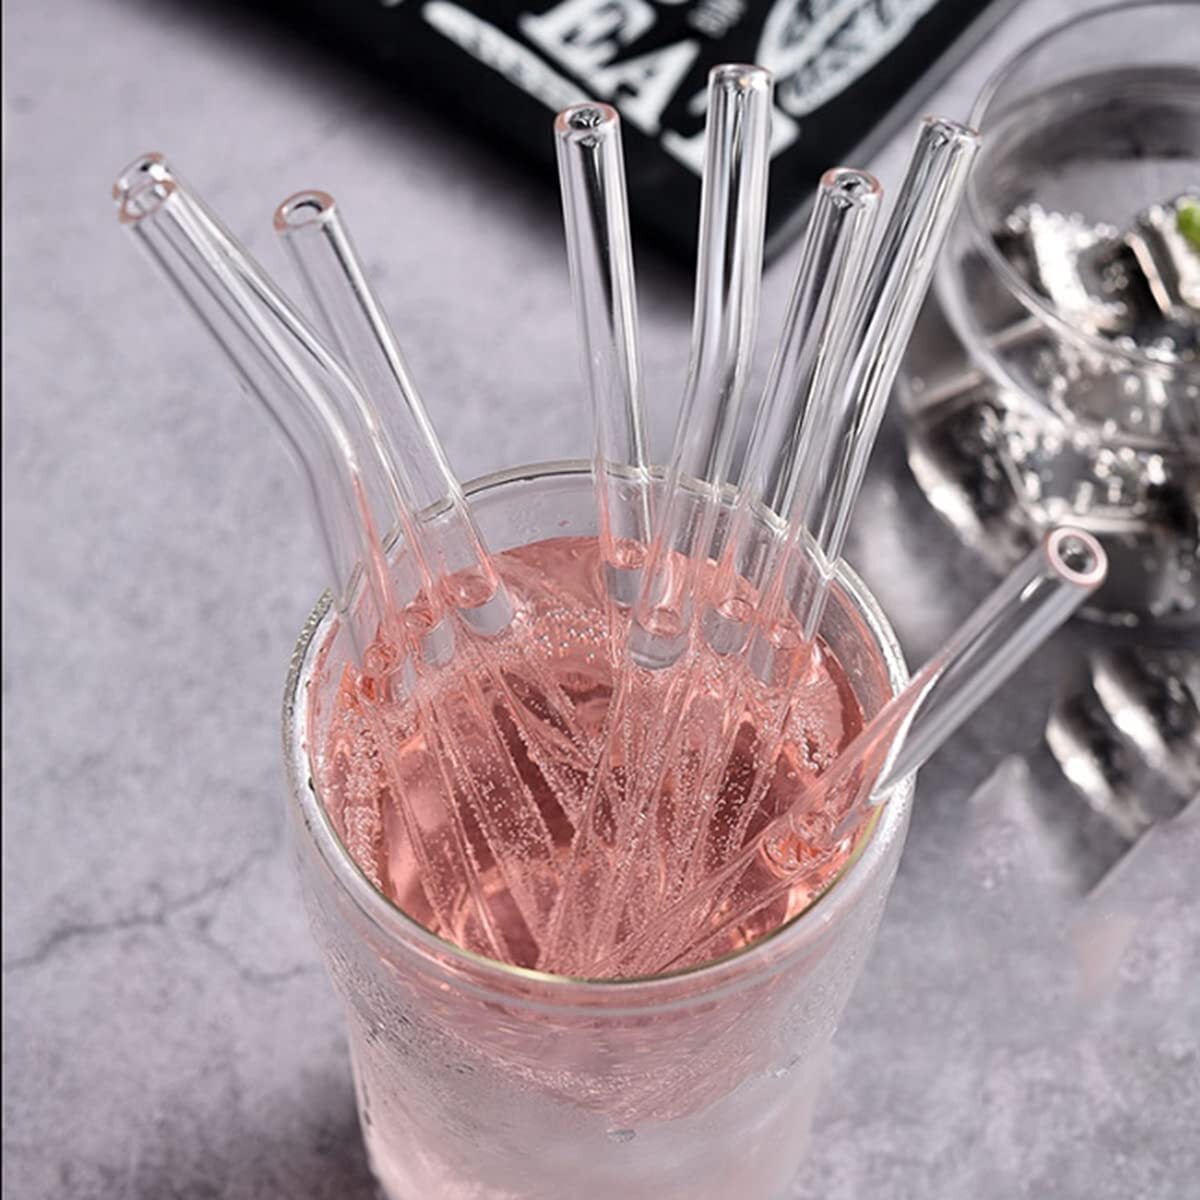 Pink Bent Reusable Glass Drinking Straw - 2 Pack – The Social Dawg